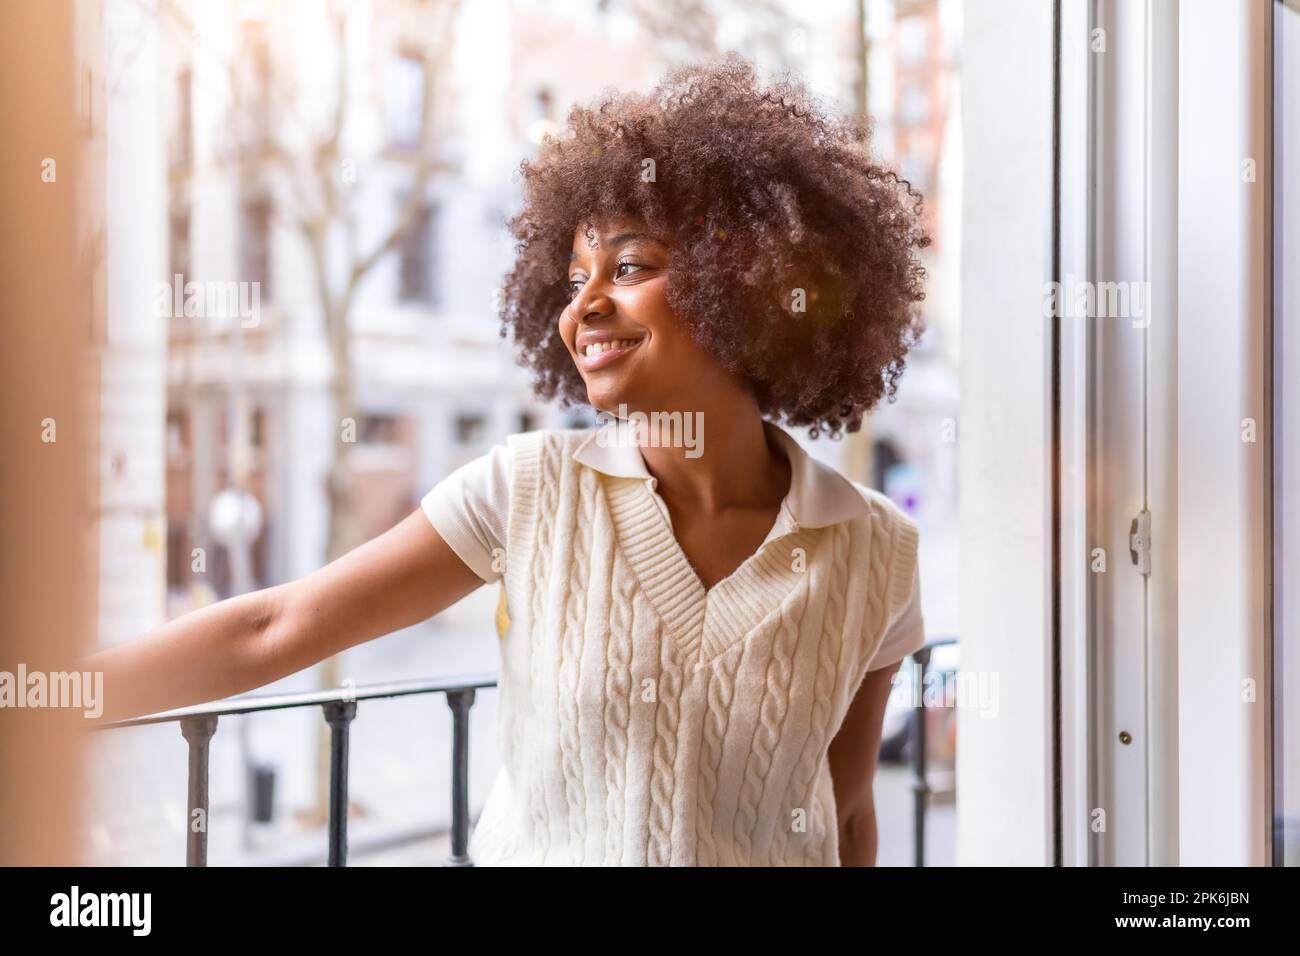 Portrait of a young black ethnic woman with afro hair on a balcony at home smiling, everyday situation, at sunset Stock Photo